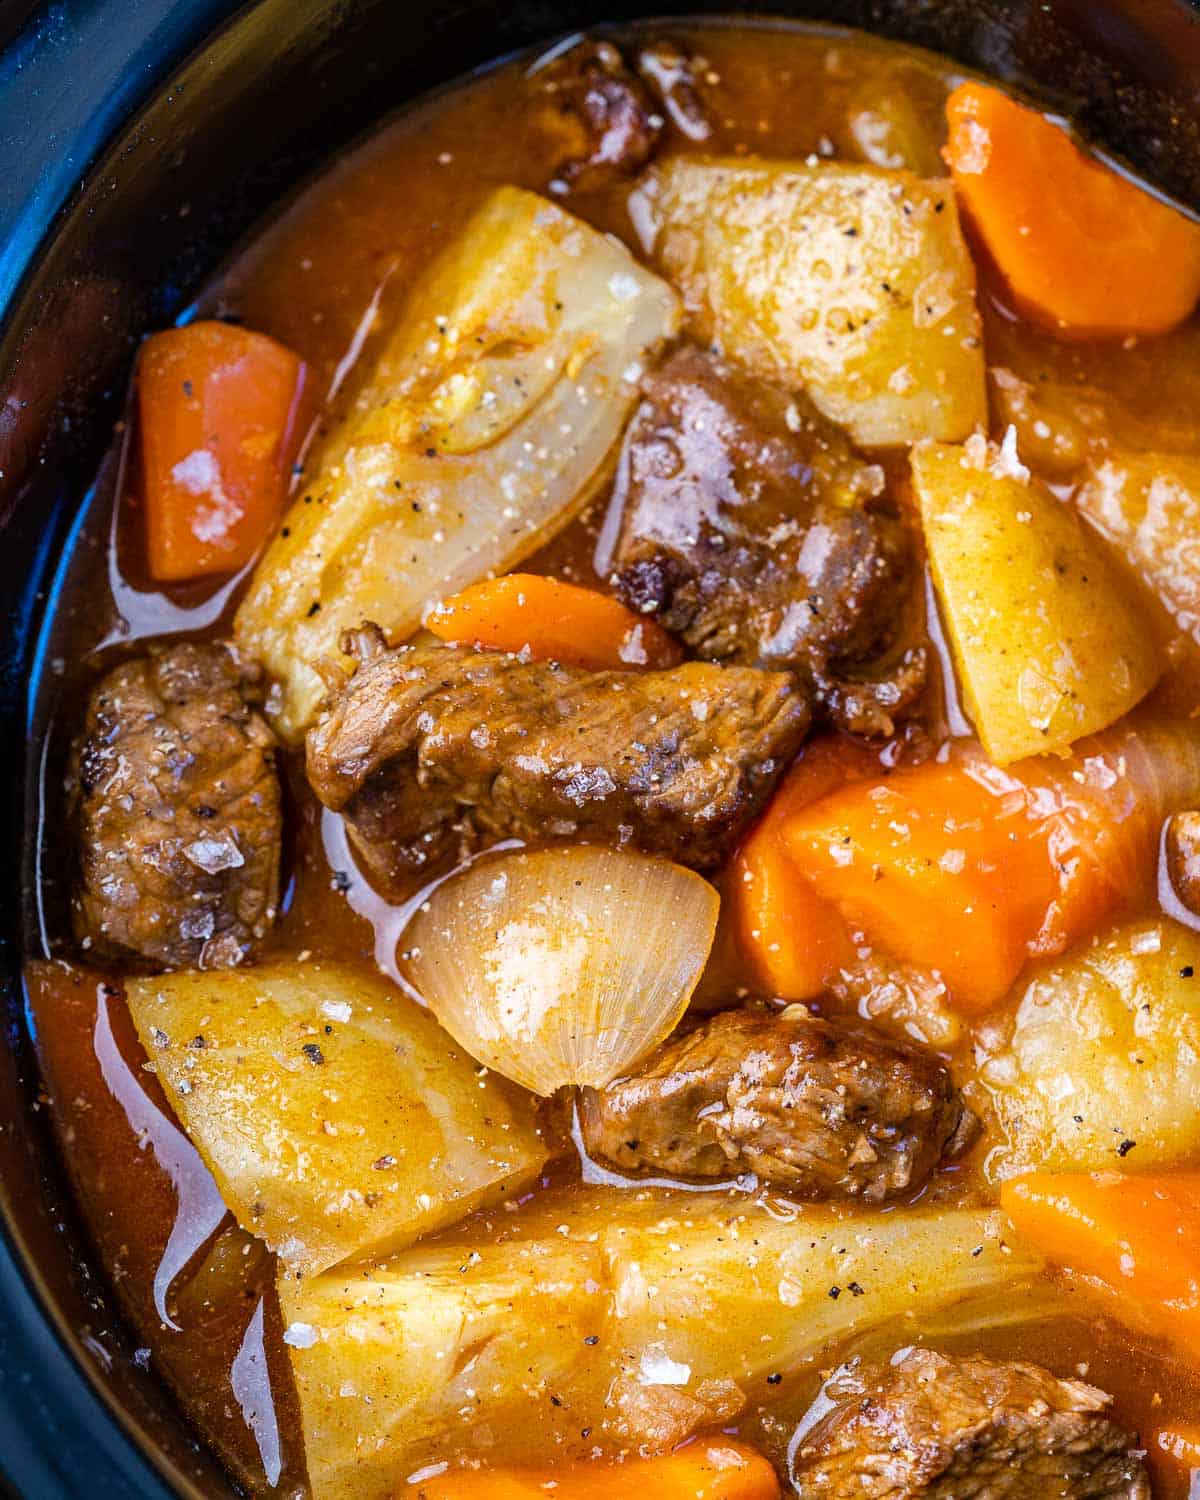 very close image of onions, carrots, beef, and potatoes in Crockpot with broth and seasoning